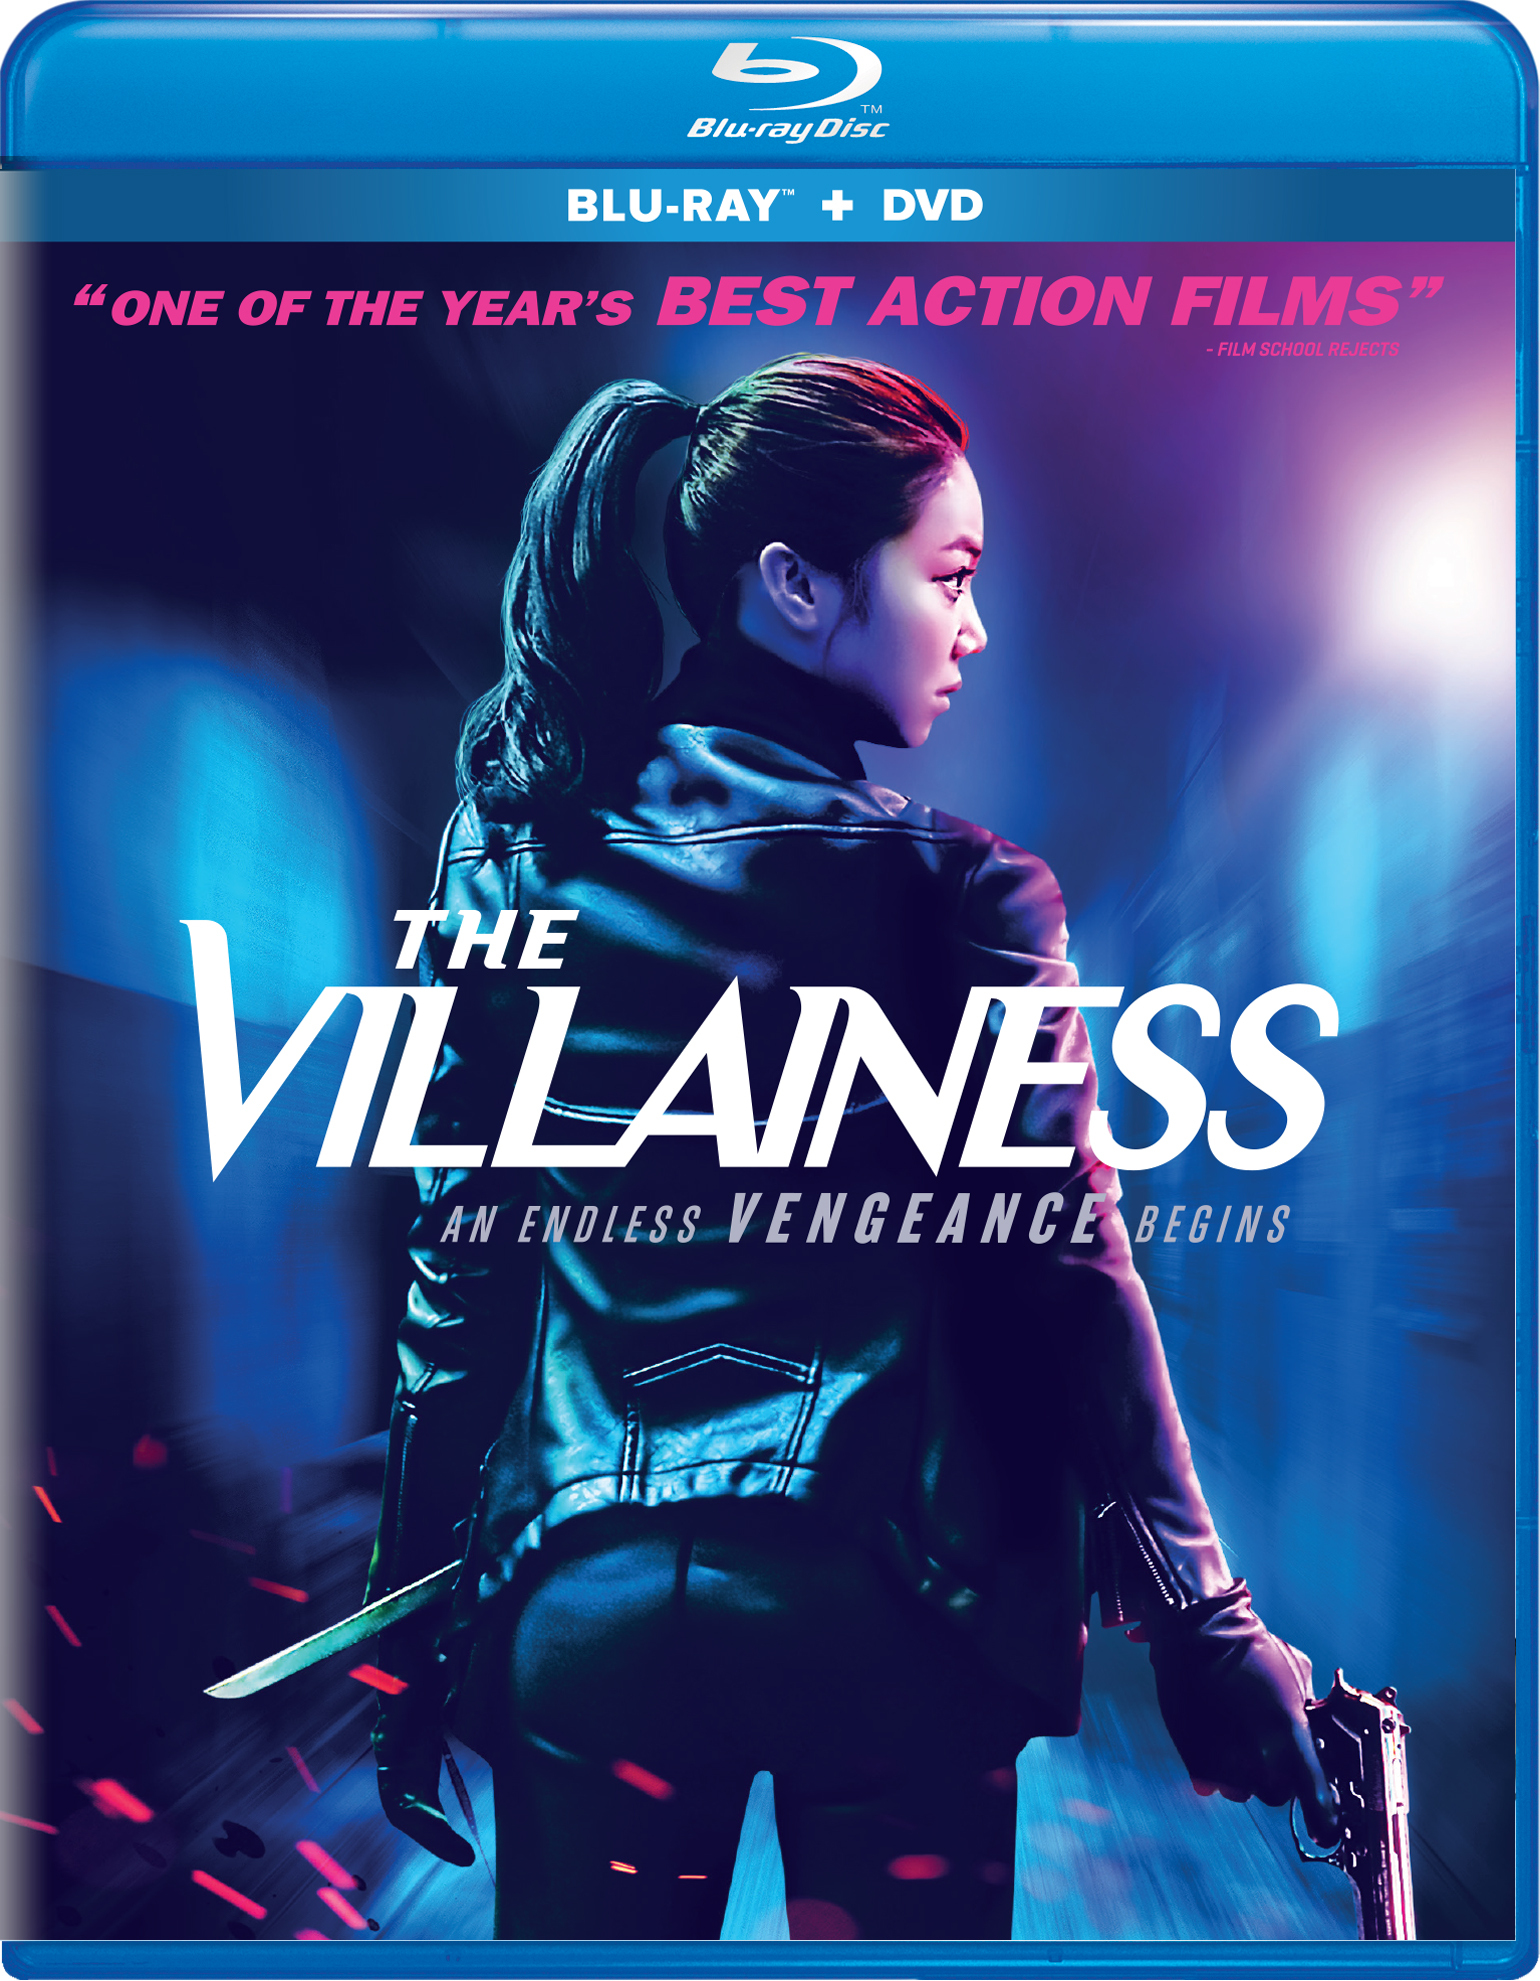 The Villainess (with DVD) - Blu-ray [ 2017 ]  - Foreign Movies On Blu-ray - Movies On GRUV